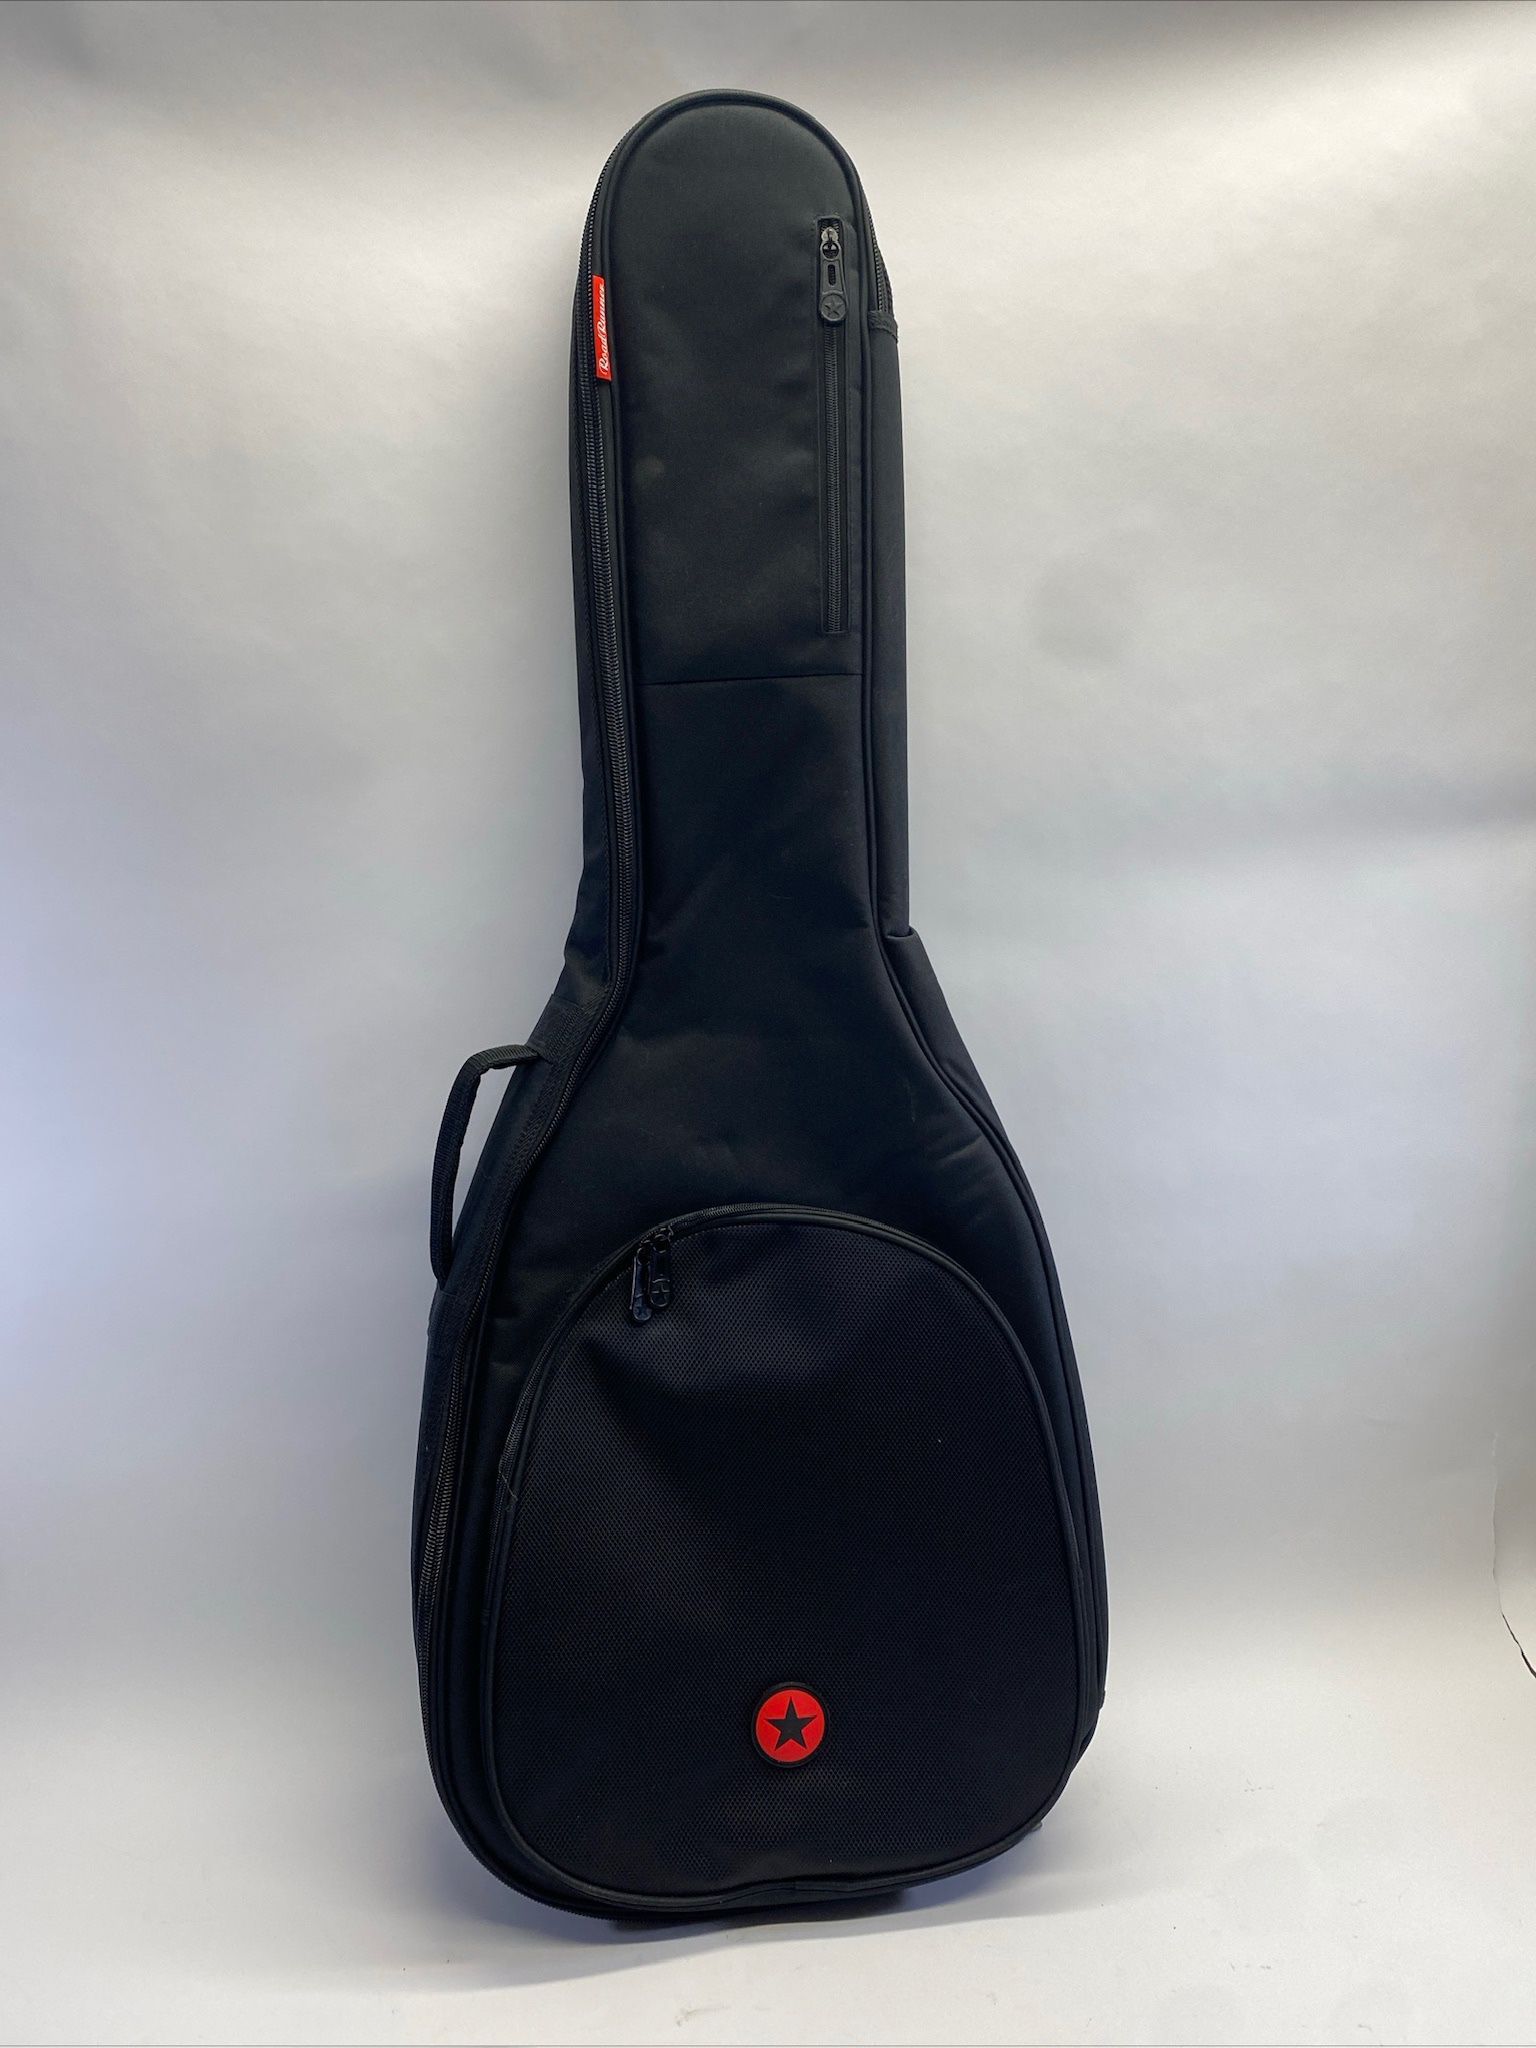 Road Runner Soft Padded Electric Guitar Case With Shoulder Straps 38”x 14”